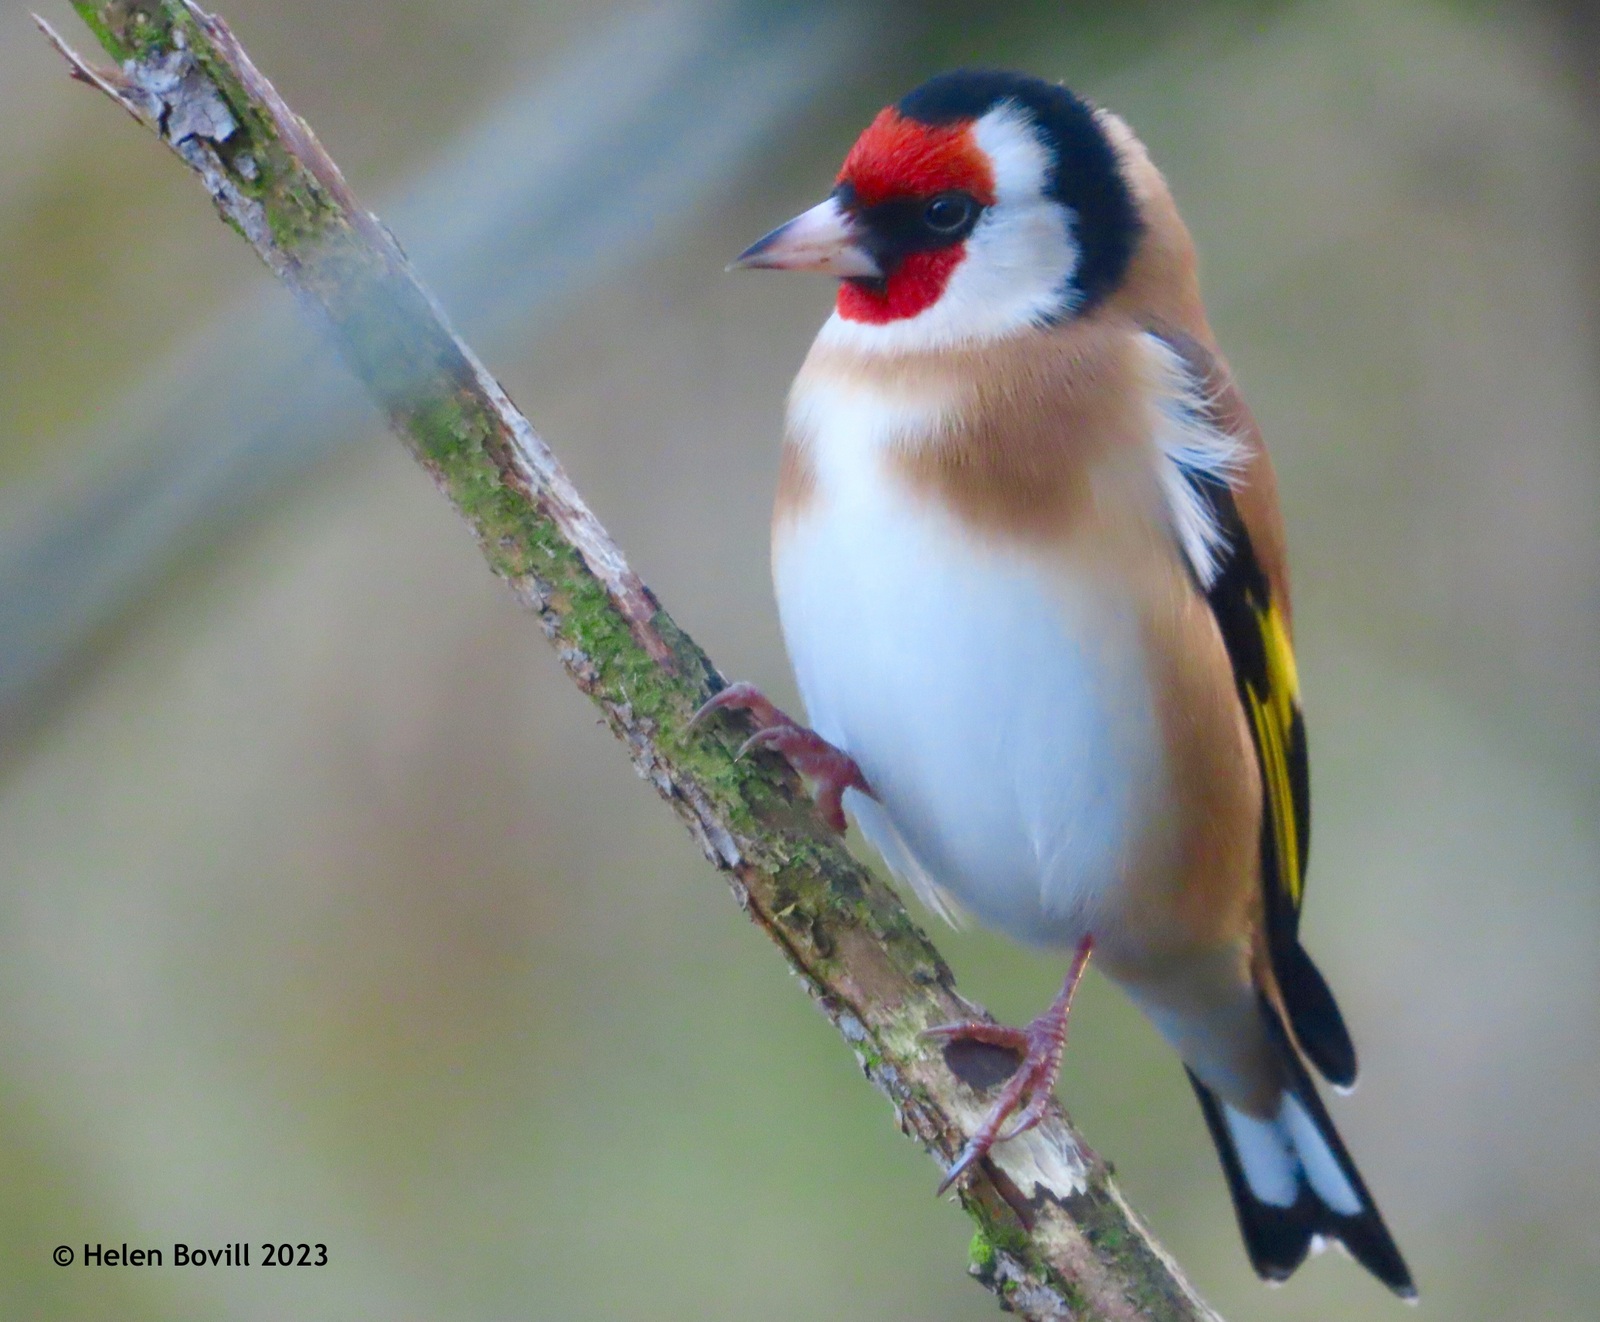 A goldfinch on a branch in the cemetery